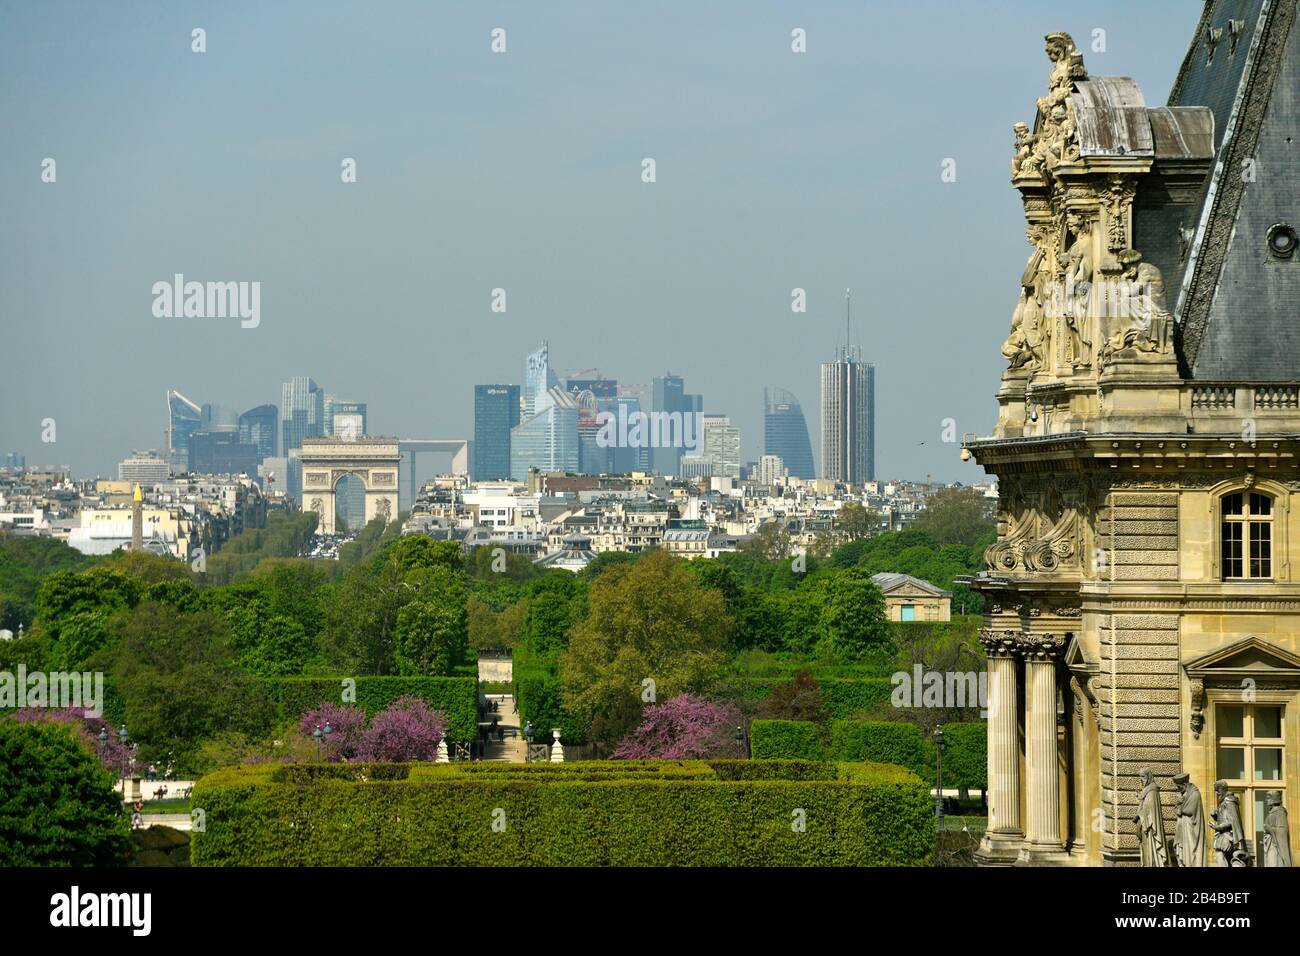 France, Paris, UNESCO World Heritage Site, general view with the Louvre museum, the obelisk of Concorde square, the arch of Triumph and la Défense district in the background Stock Photo